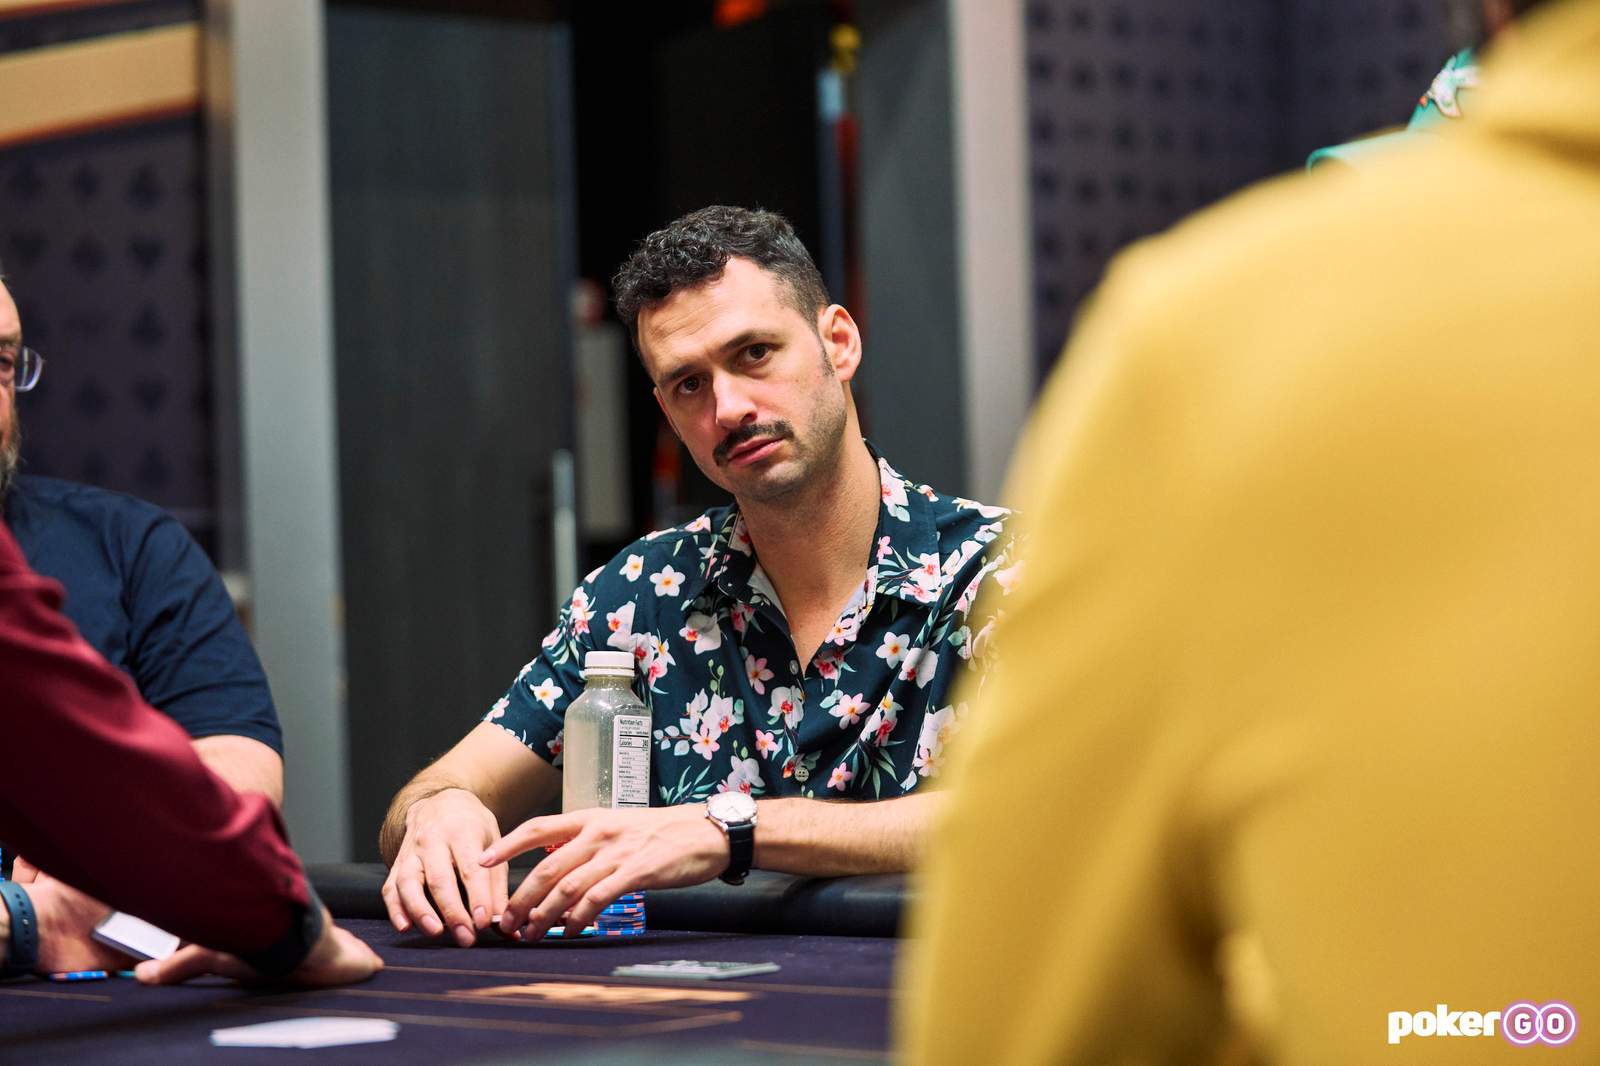 Alex Livingston Bags the Chip Lead in PGT Mixed Games Event #5: $10,300 Triple Draw Mix